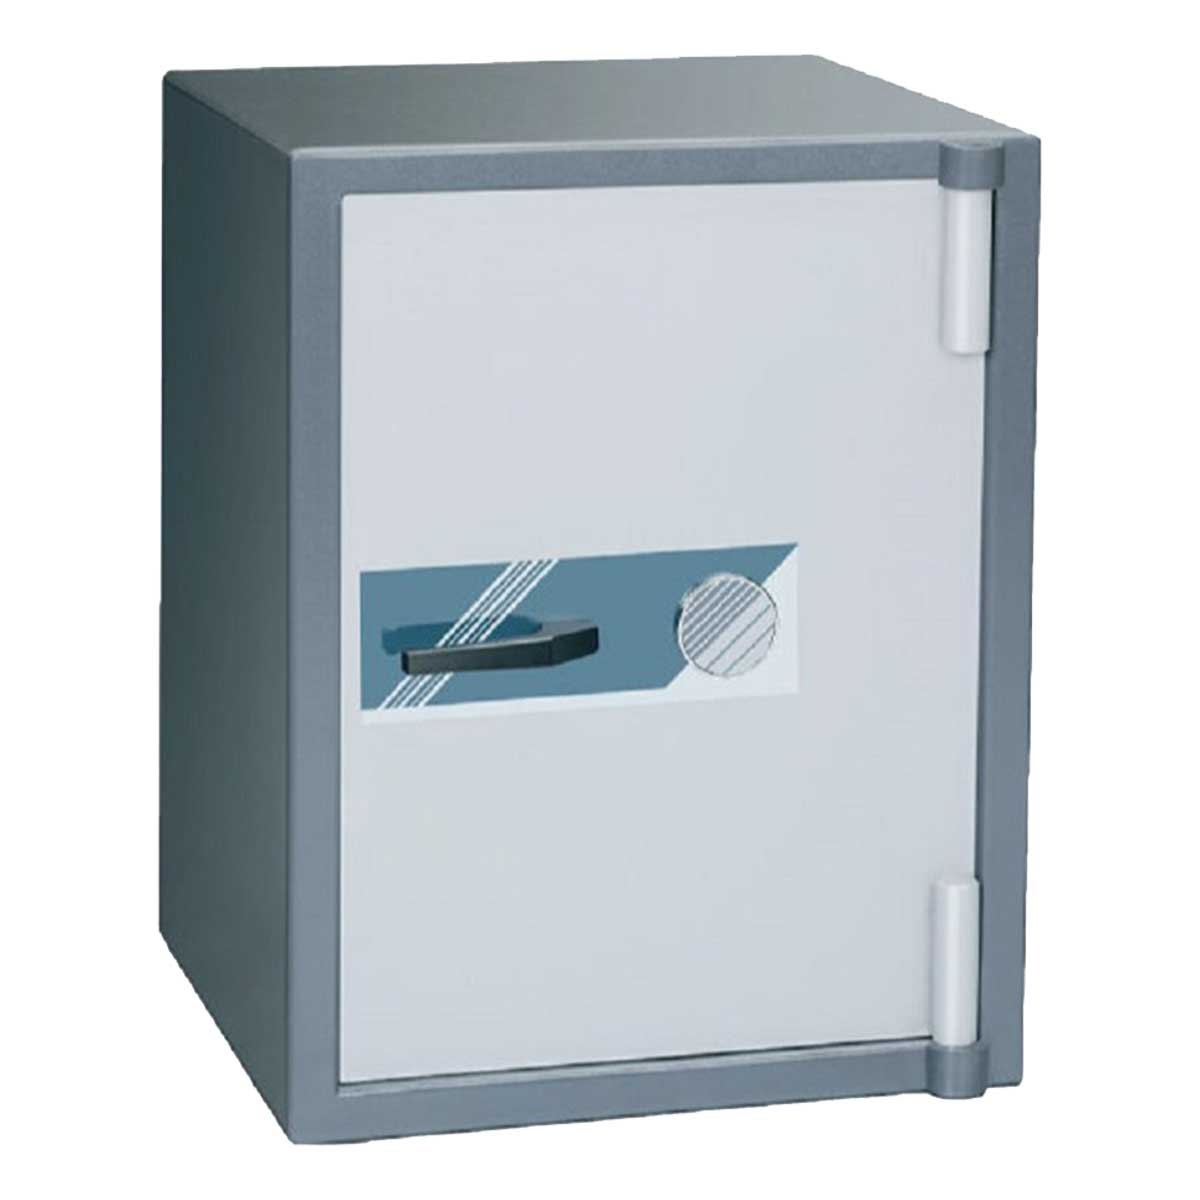 Burglary Safes Manufacturers, Suppliers in Faridabad